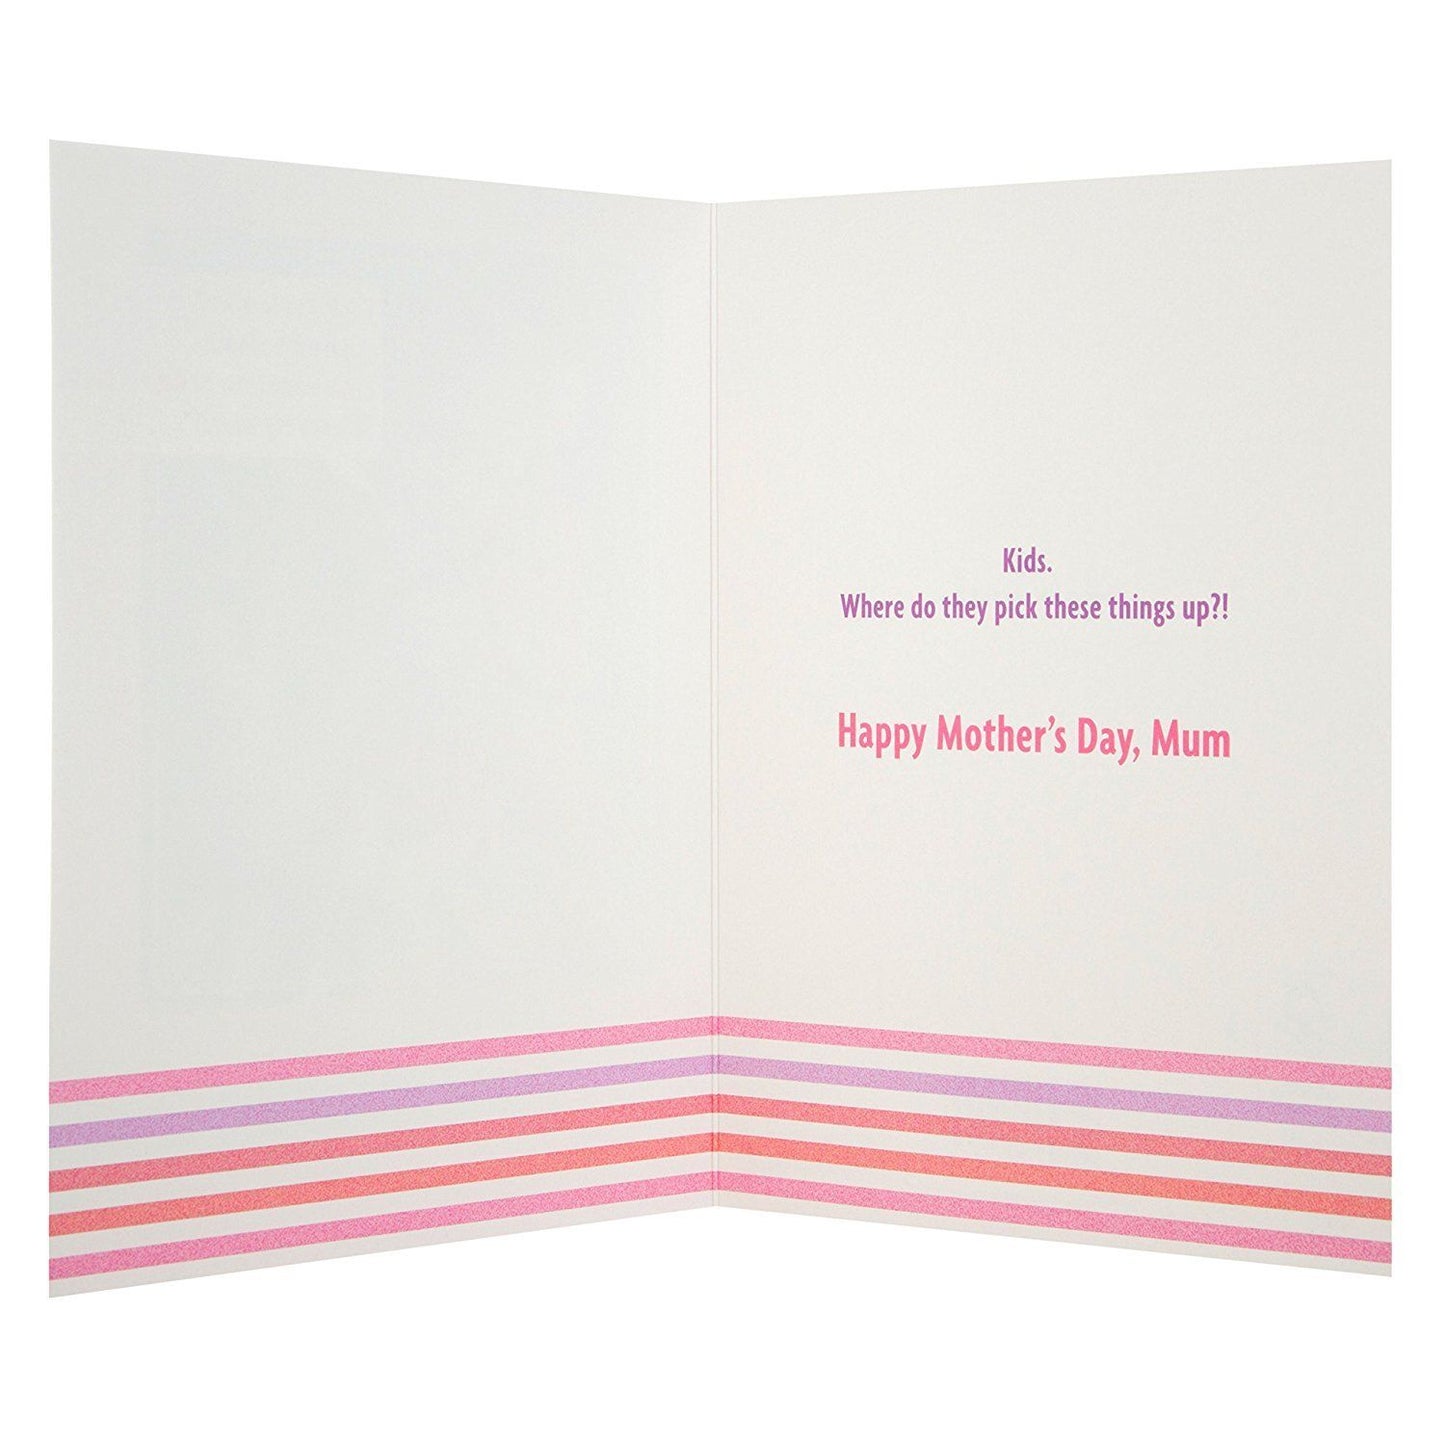 "Wine" Funny Mother's Day Greeting Card